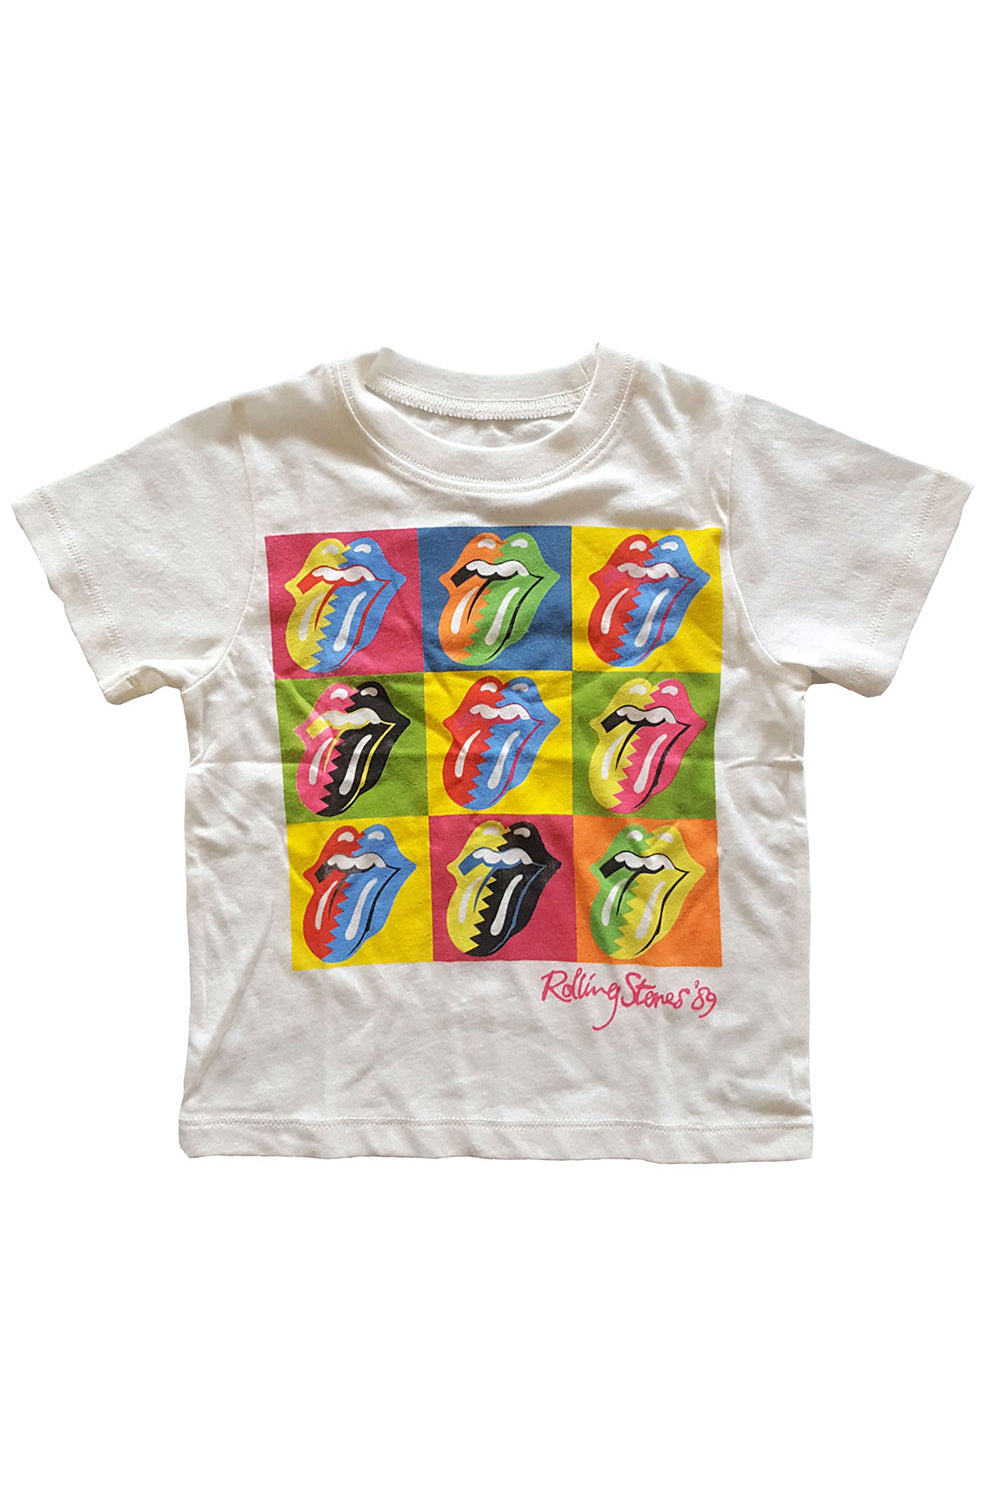 The Rolling Stones two-tone tongues kid's t-shirt.